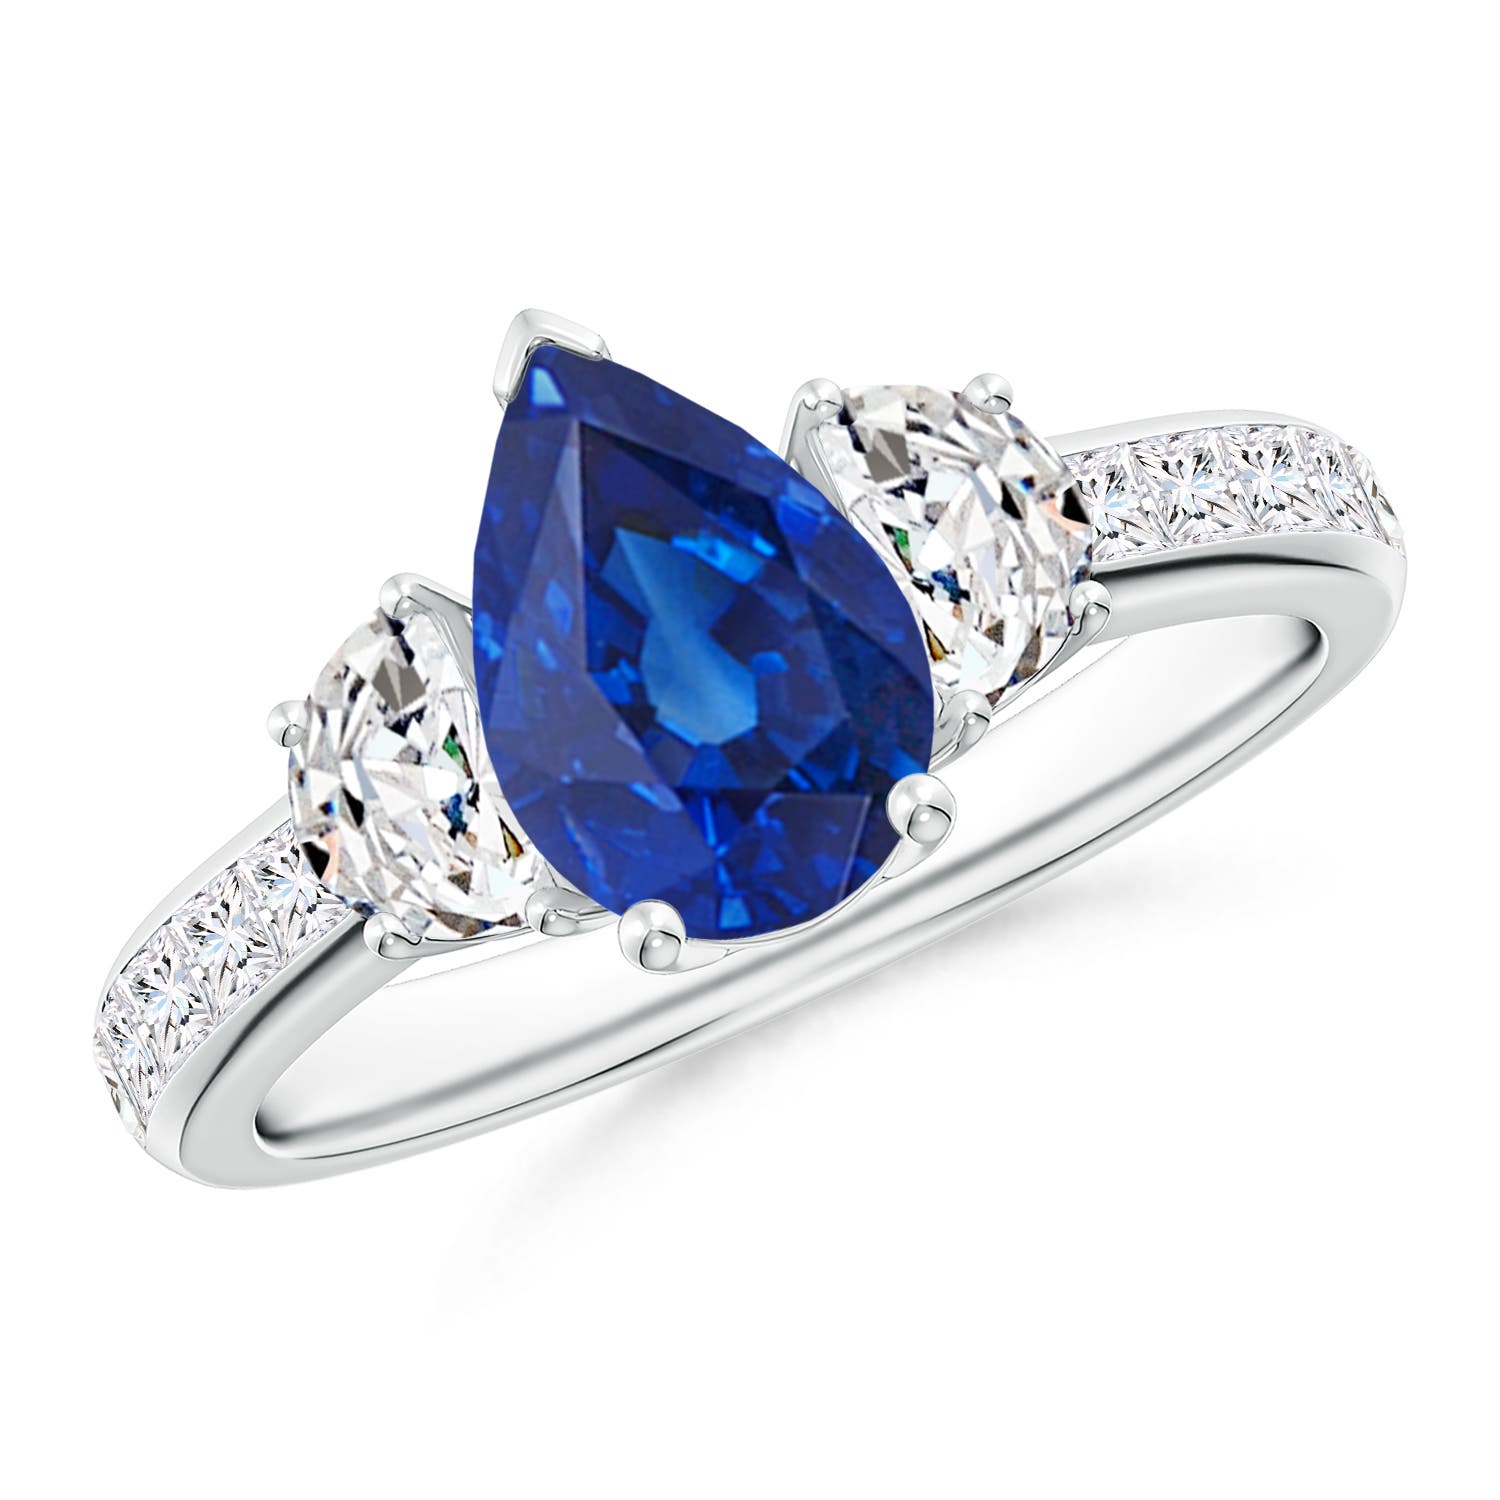 AAA - Blue Sapphire / 2.48 CT / 14 KT White Gold